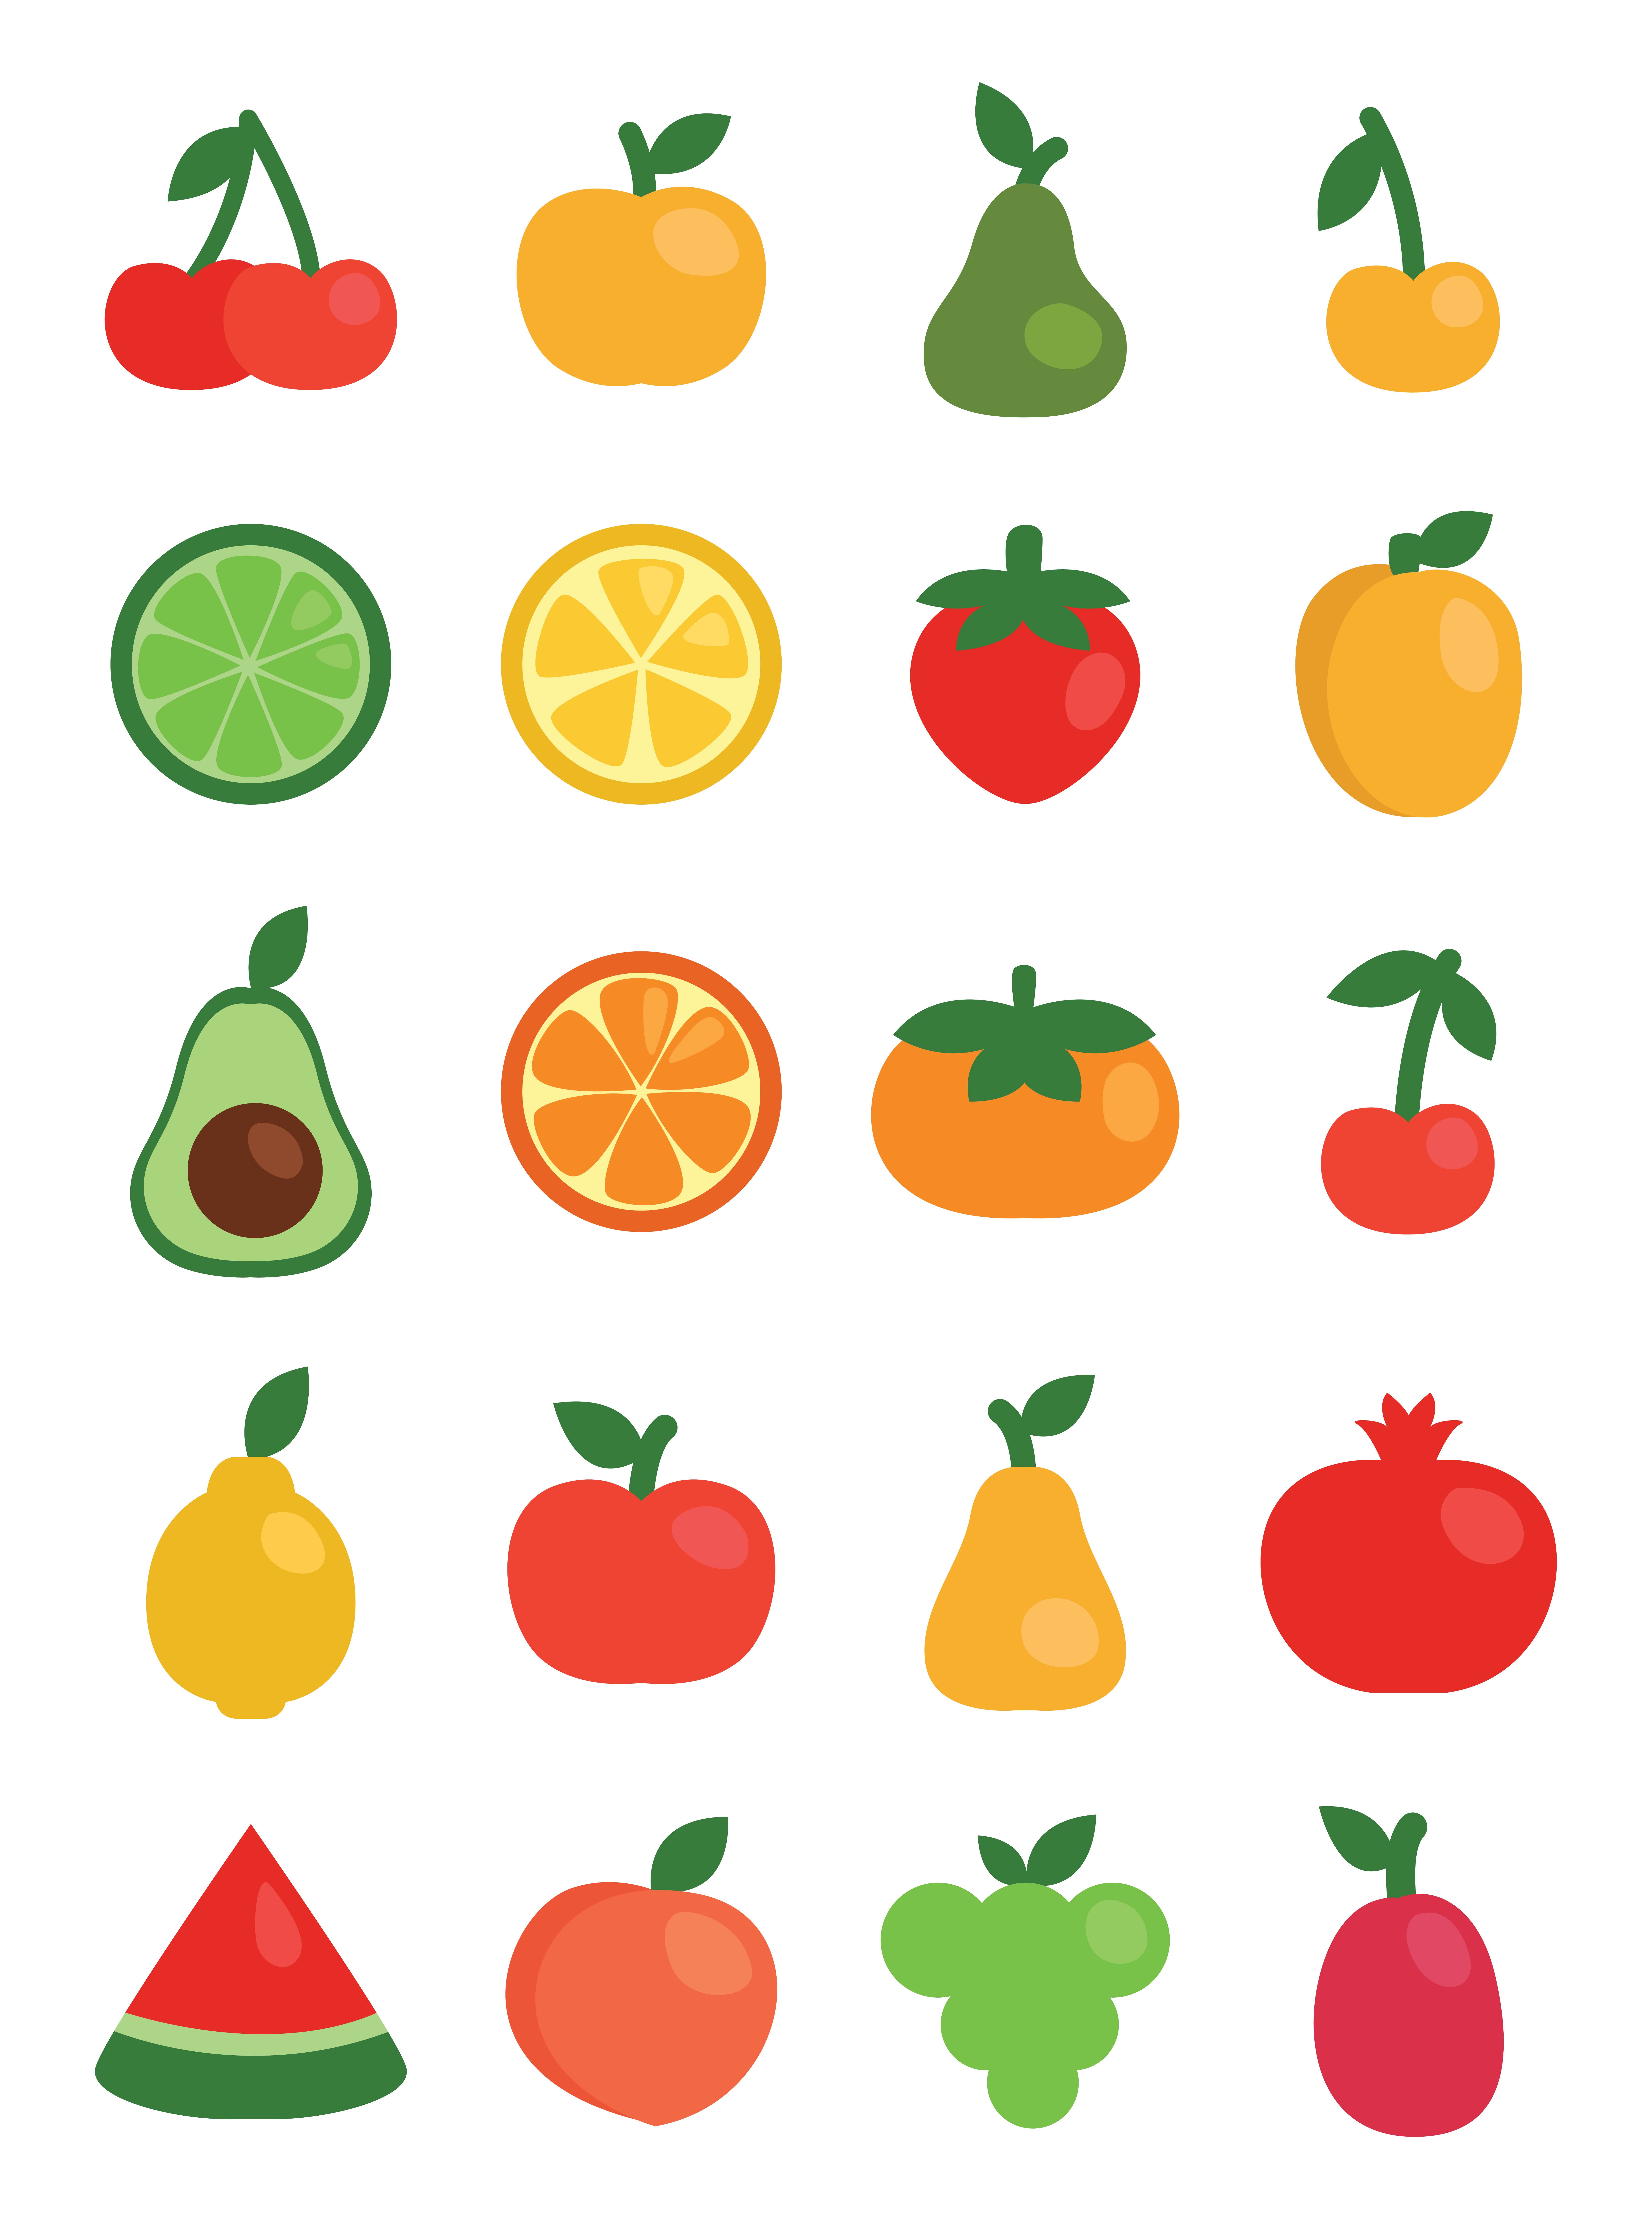 Bunch of different fruits and vegetables on a white background.